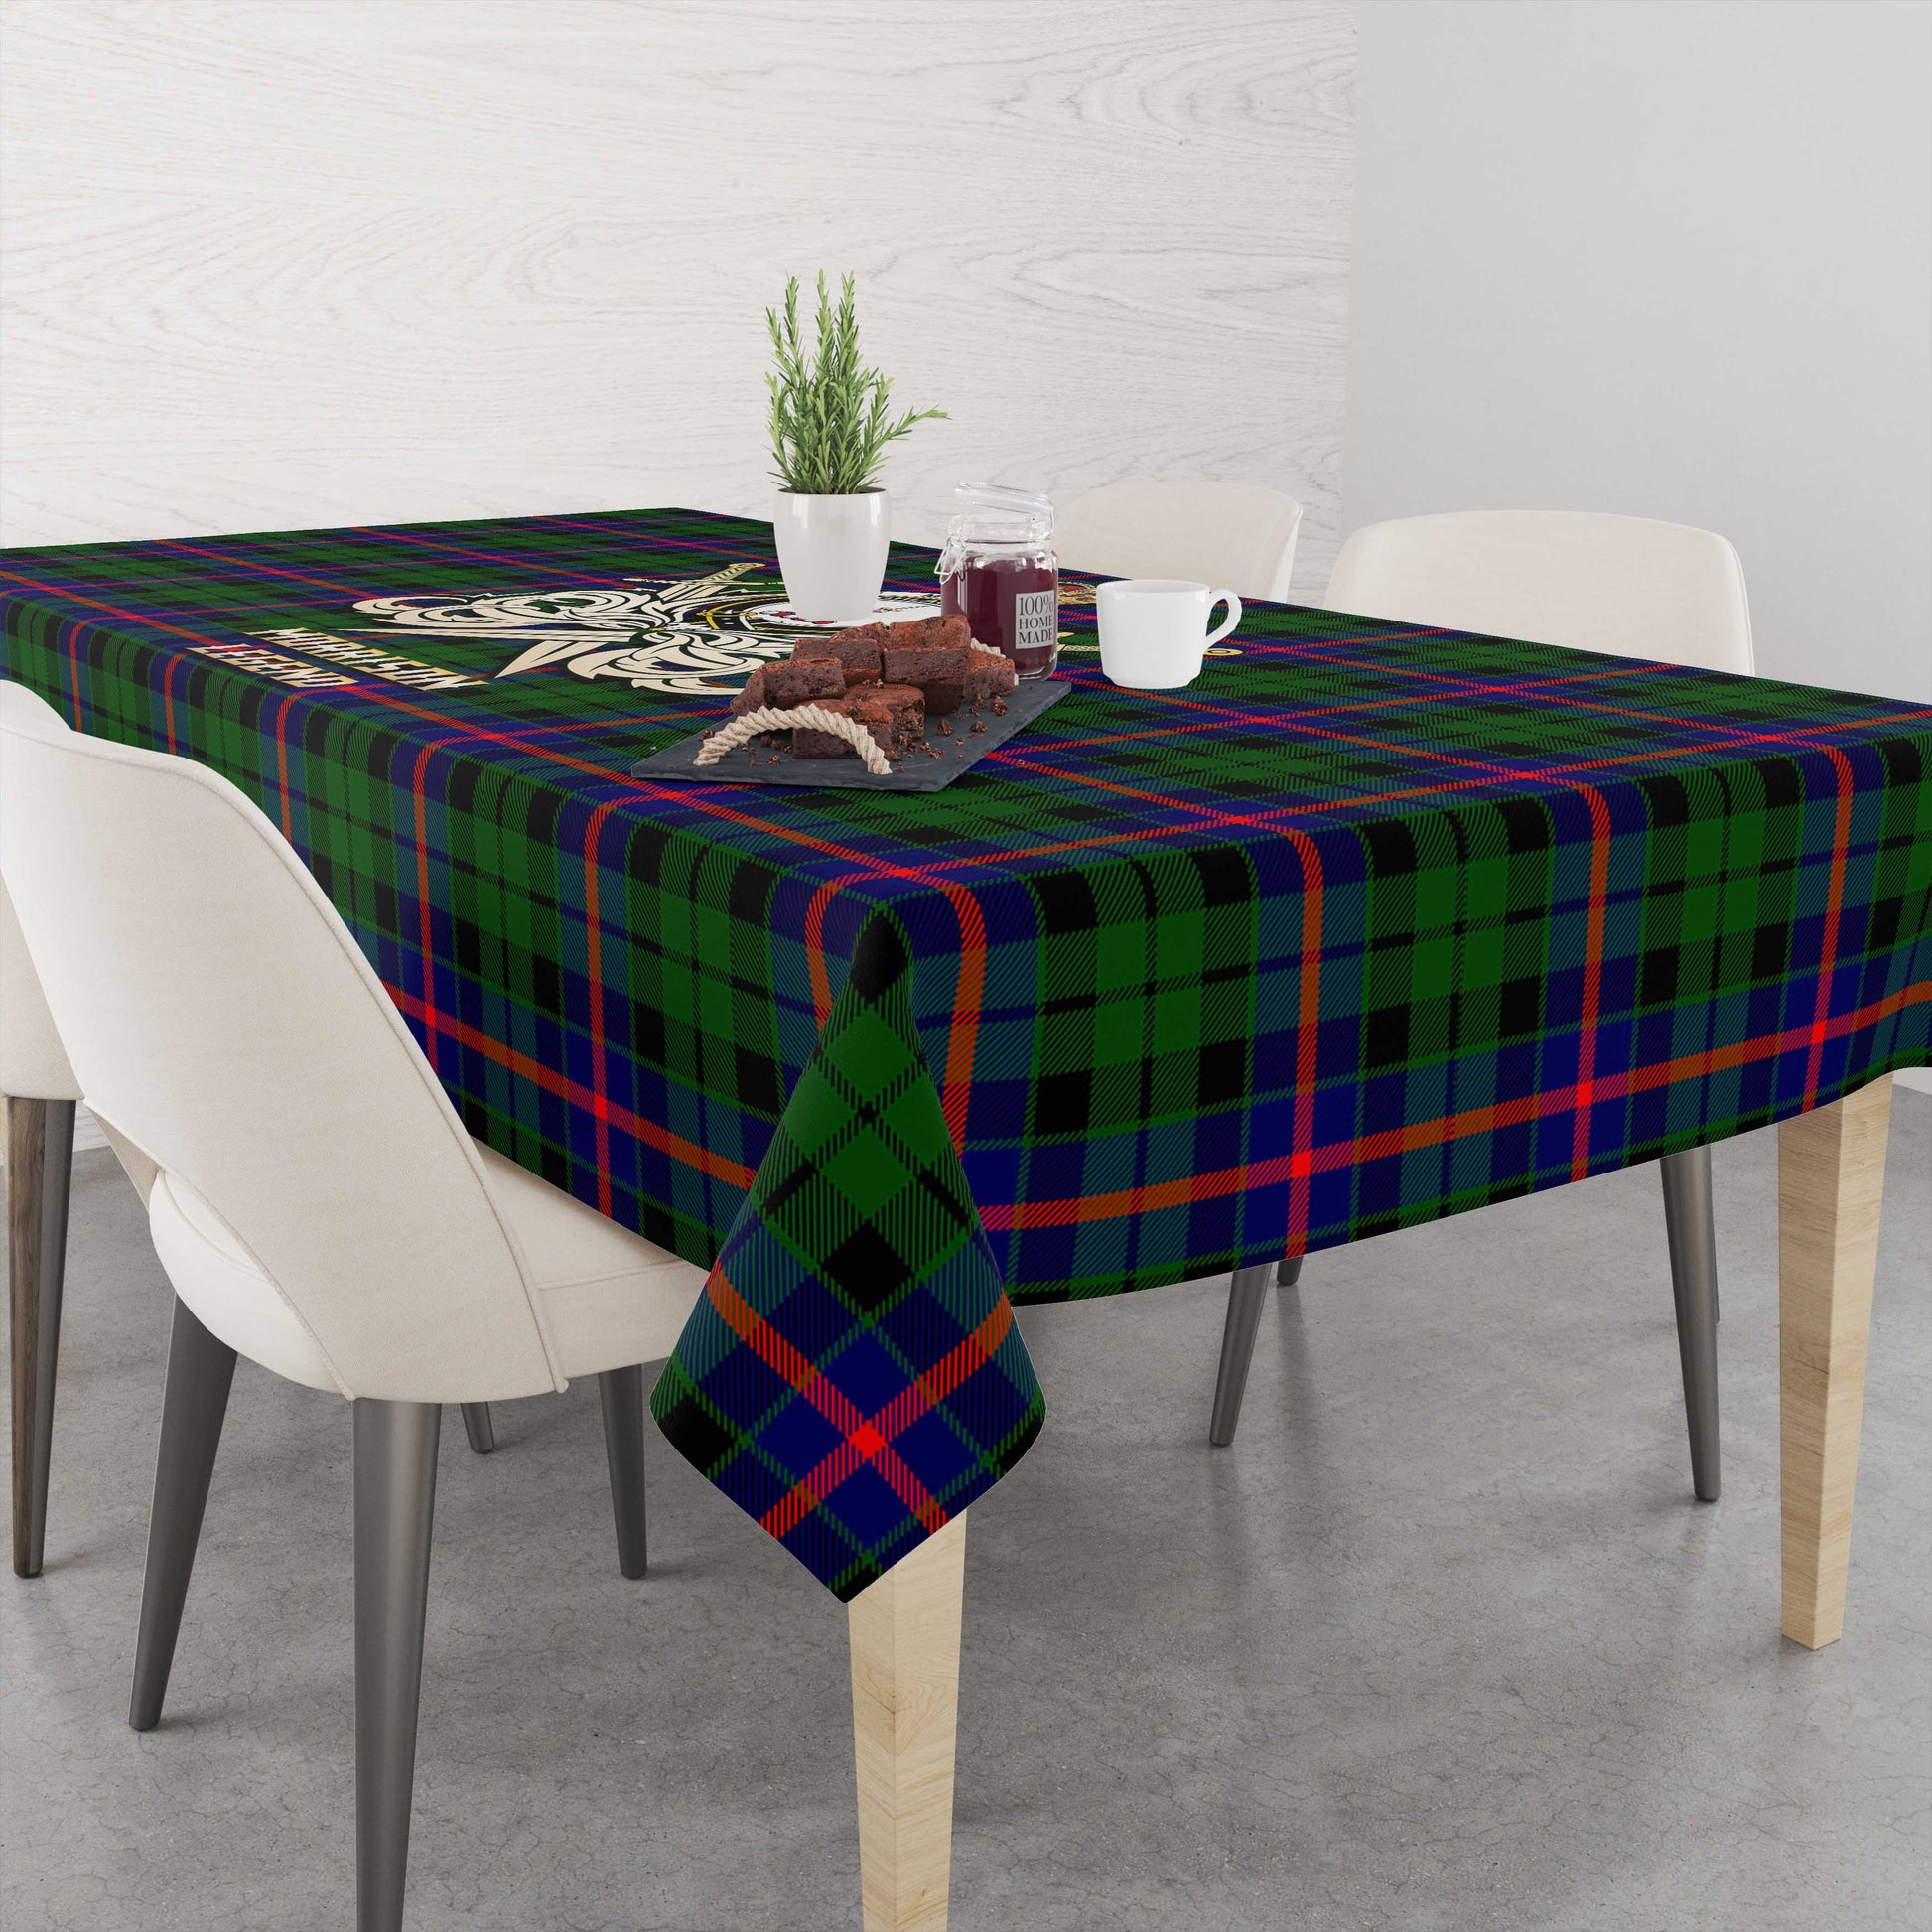 Tartan Vibes Clothing Morrison Modern Tartan Tablecloth with Clan Crest and the Golden Sword of Courageous Legacy